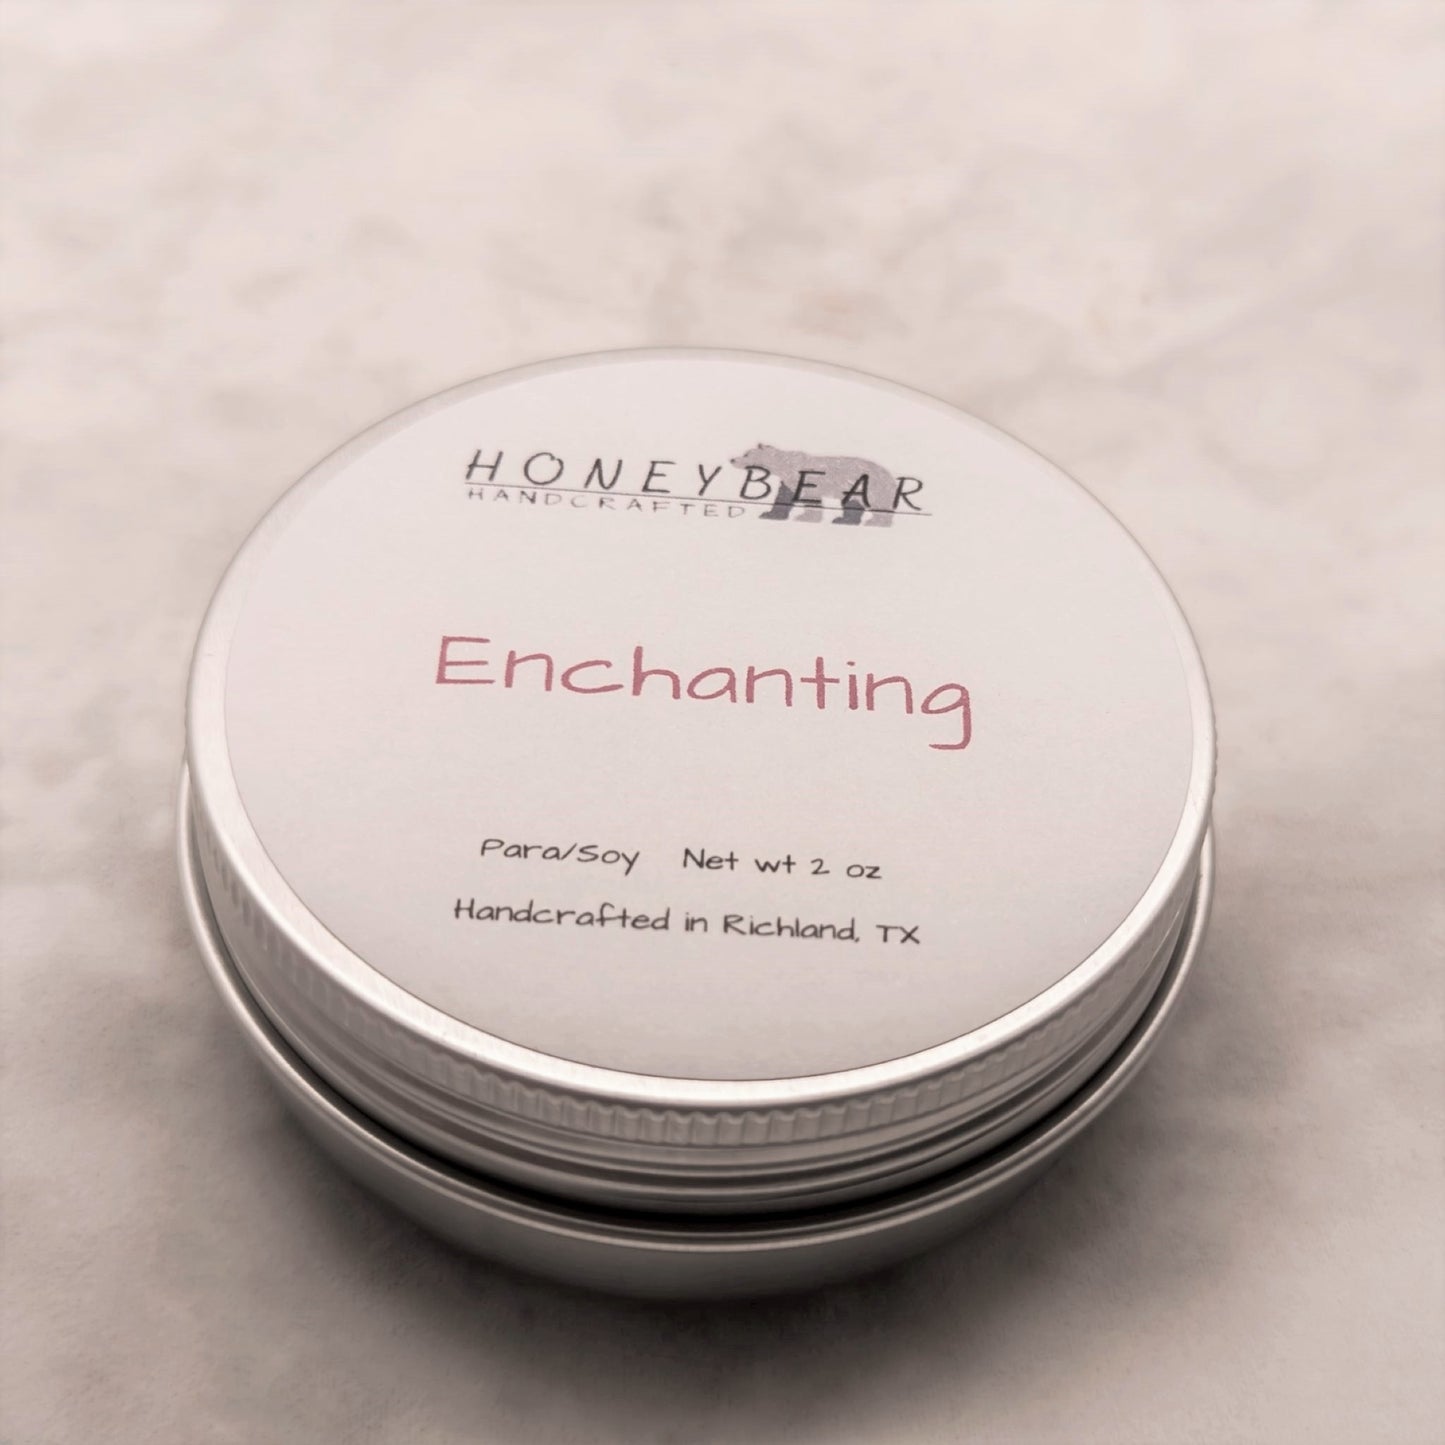 image of 2 oz travel or sample size candle labeled Enchanting on a white background